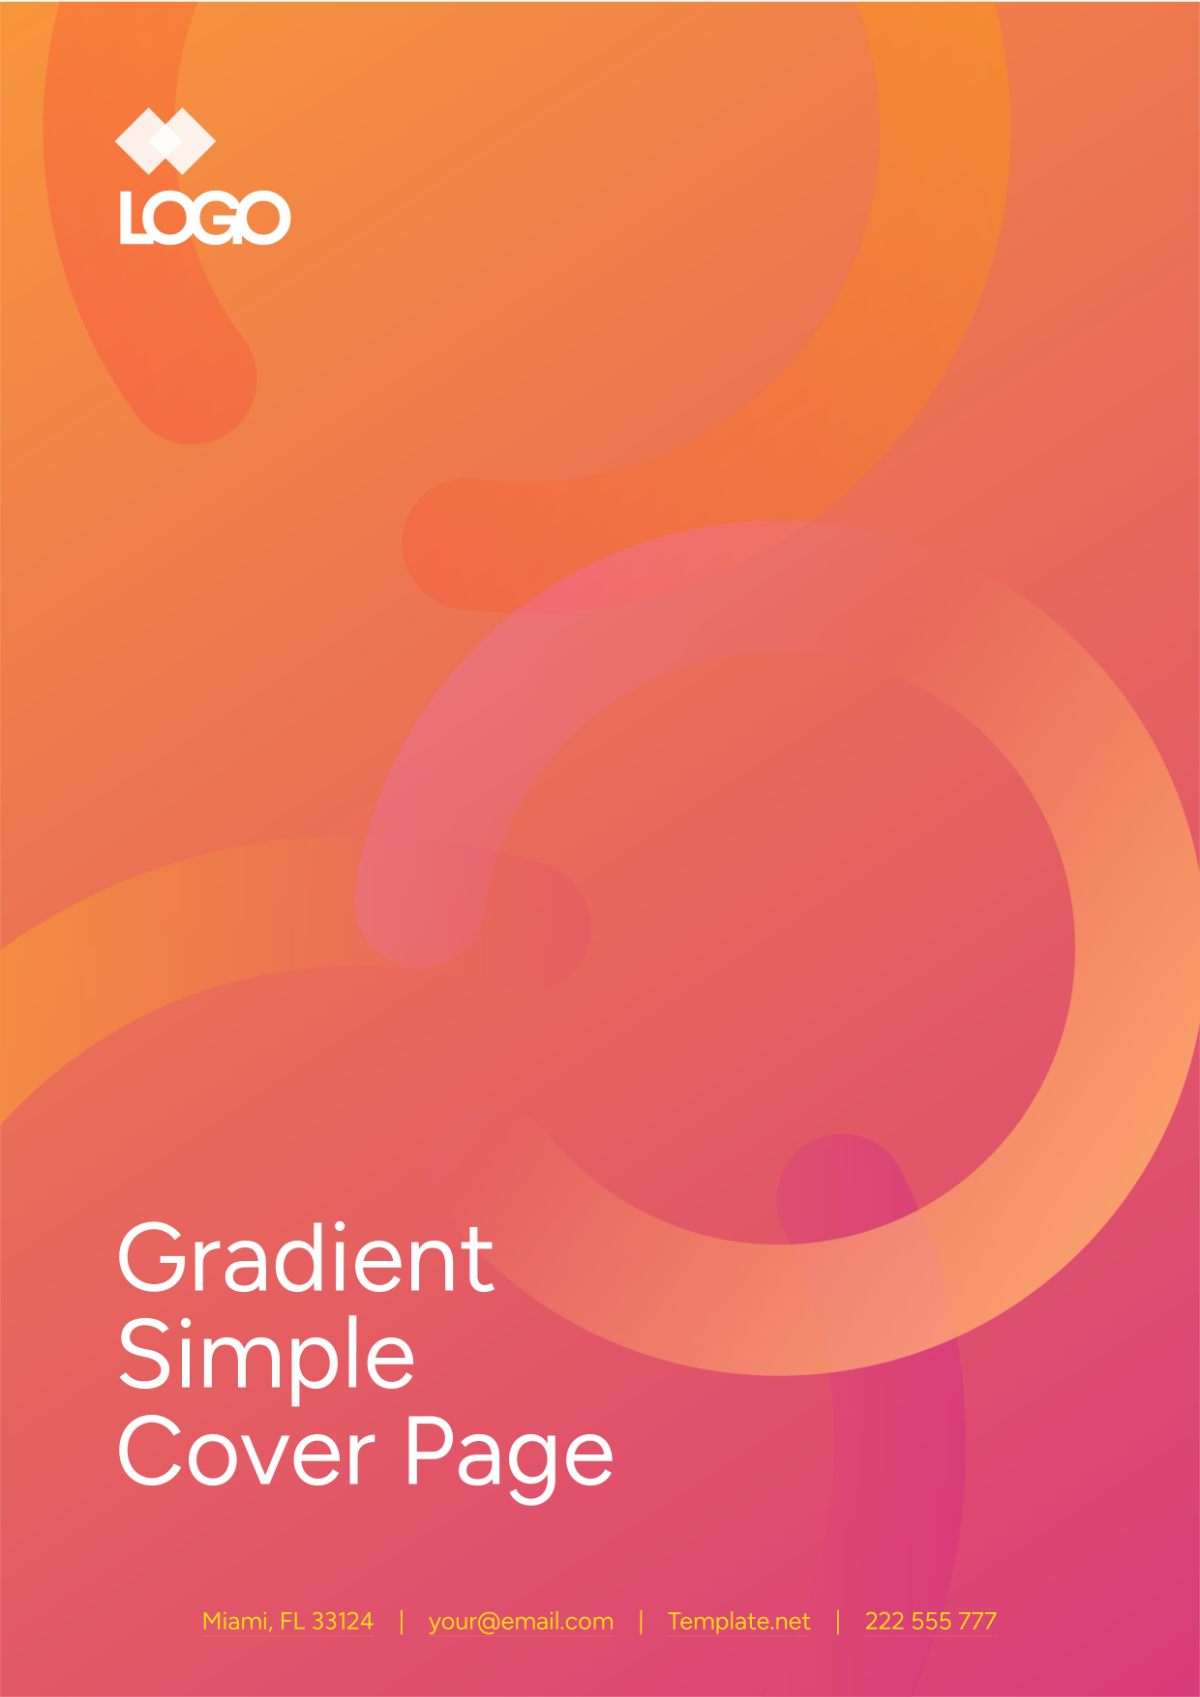 Gradient Simple Cover Page Template